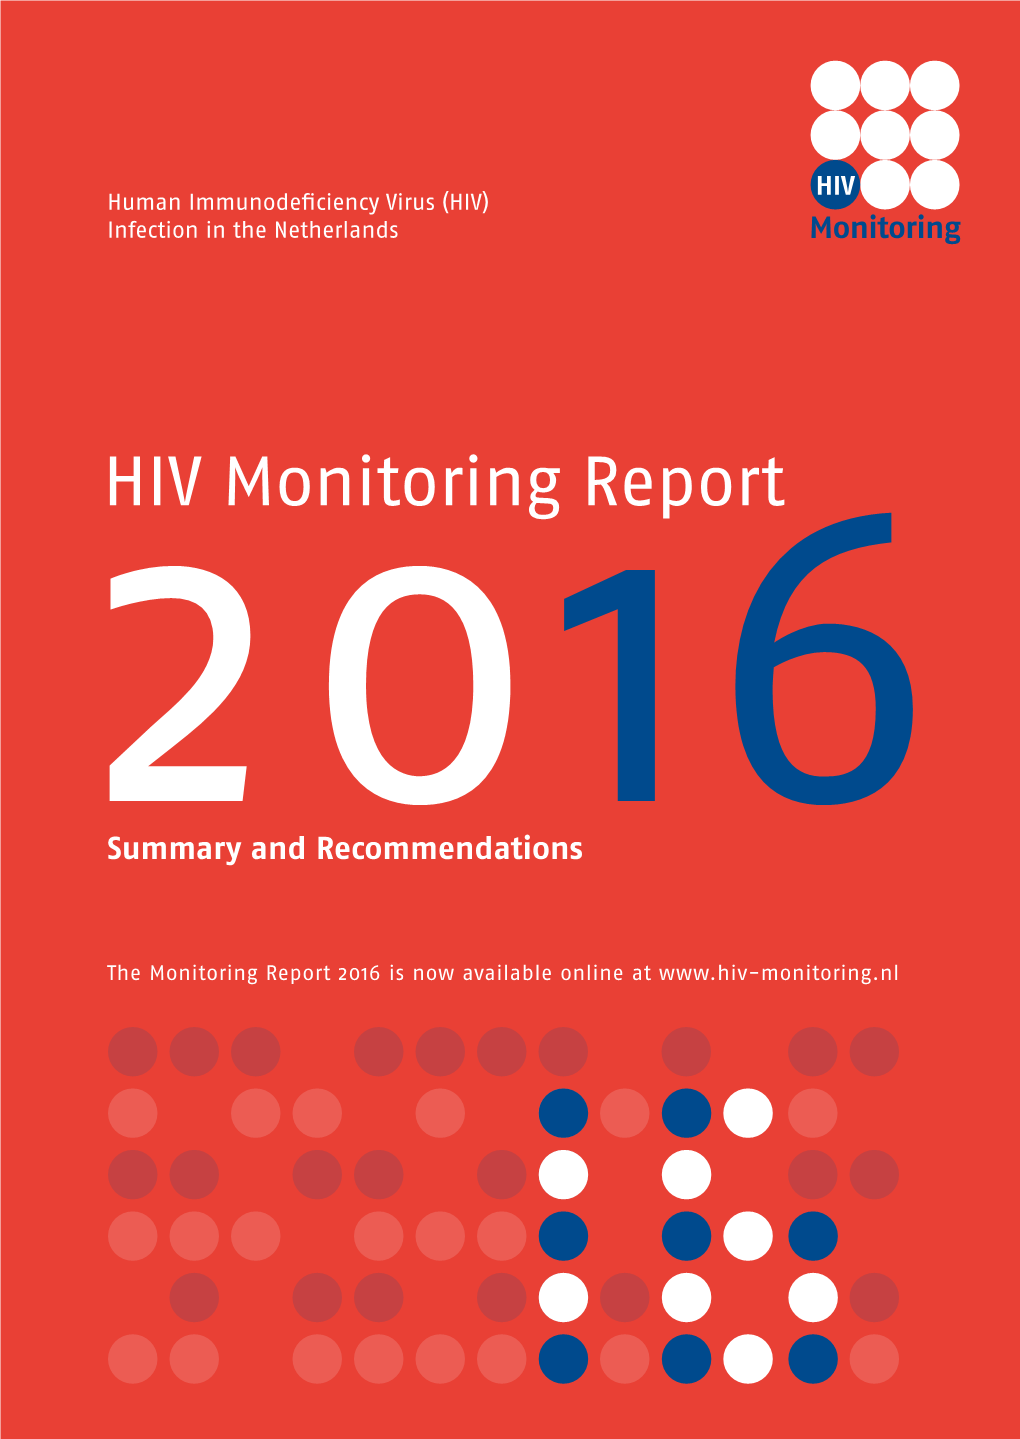 Monitoring Report 2016 Summary & Recommendations 2016